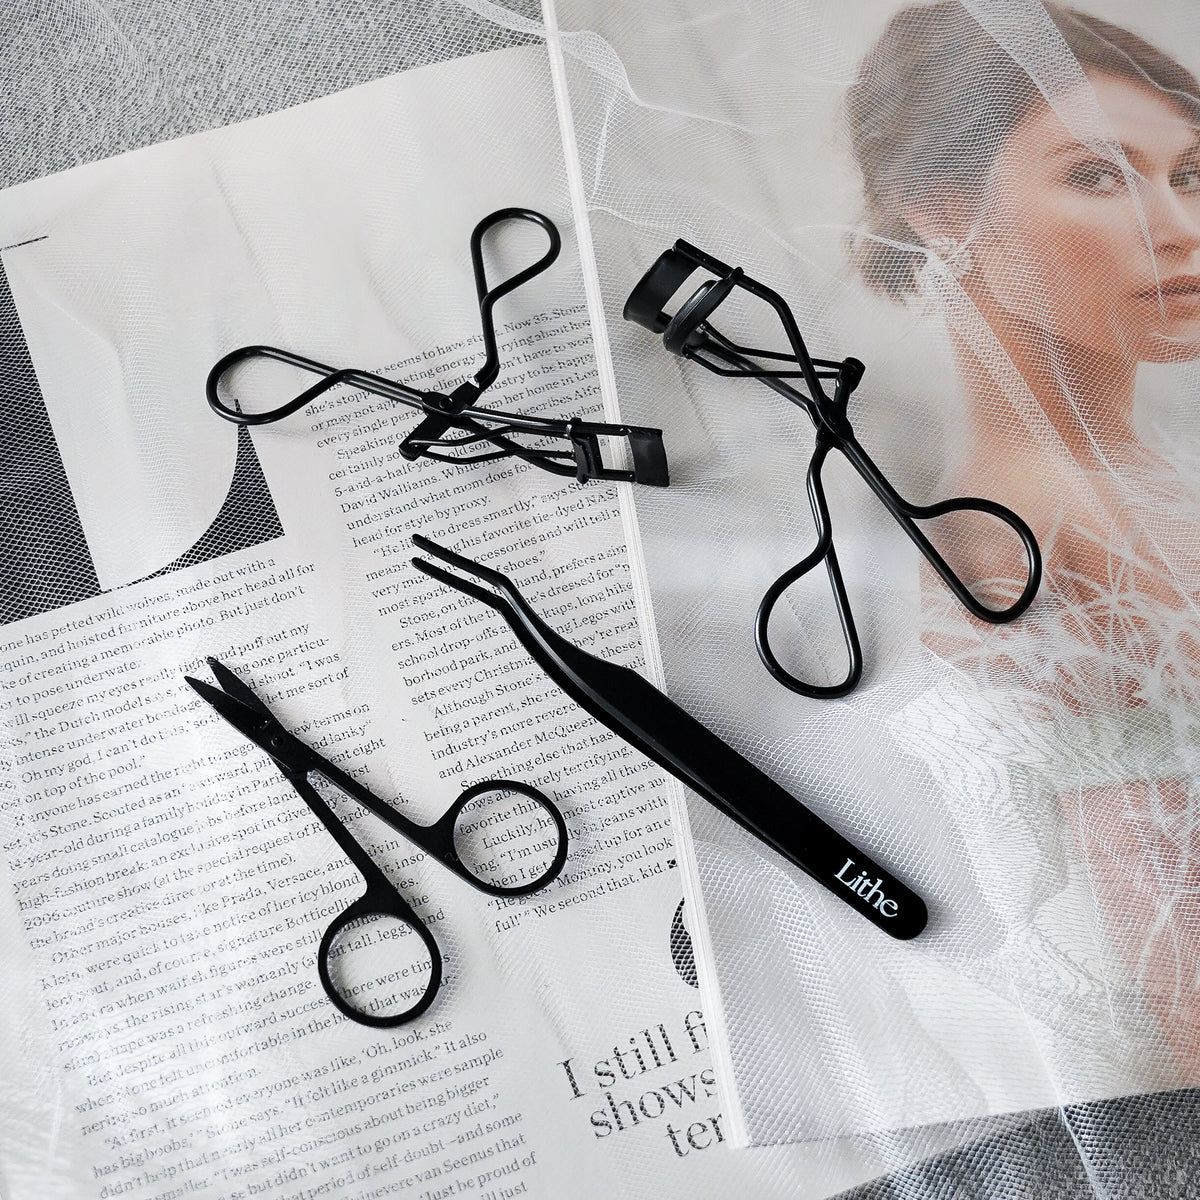 Lithe Lashes false lashes accessory, the Lithe Mini Lash Curler. A product image showing all Lithe's matte black lash tools, with the Lash Scissors in the bottom left, the Mini Lash Curler at the top, the Lash Applicator at the bottom of the page, and the Lithe Lash Curler in the upper right portion of the image, all of which are laying gently on black and white magazine print.